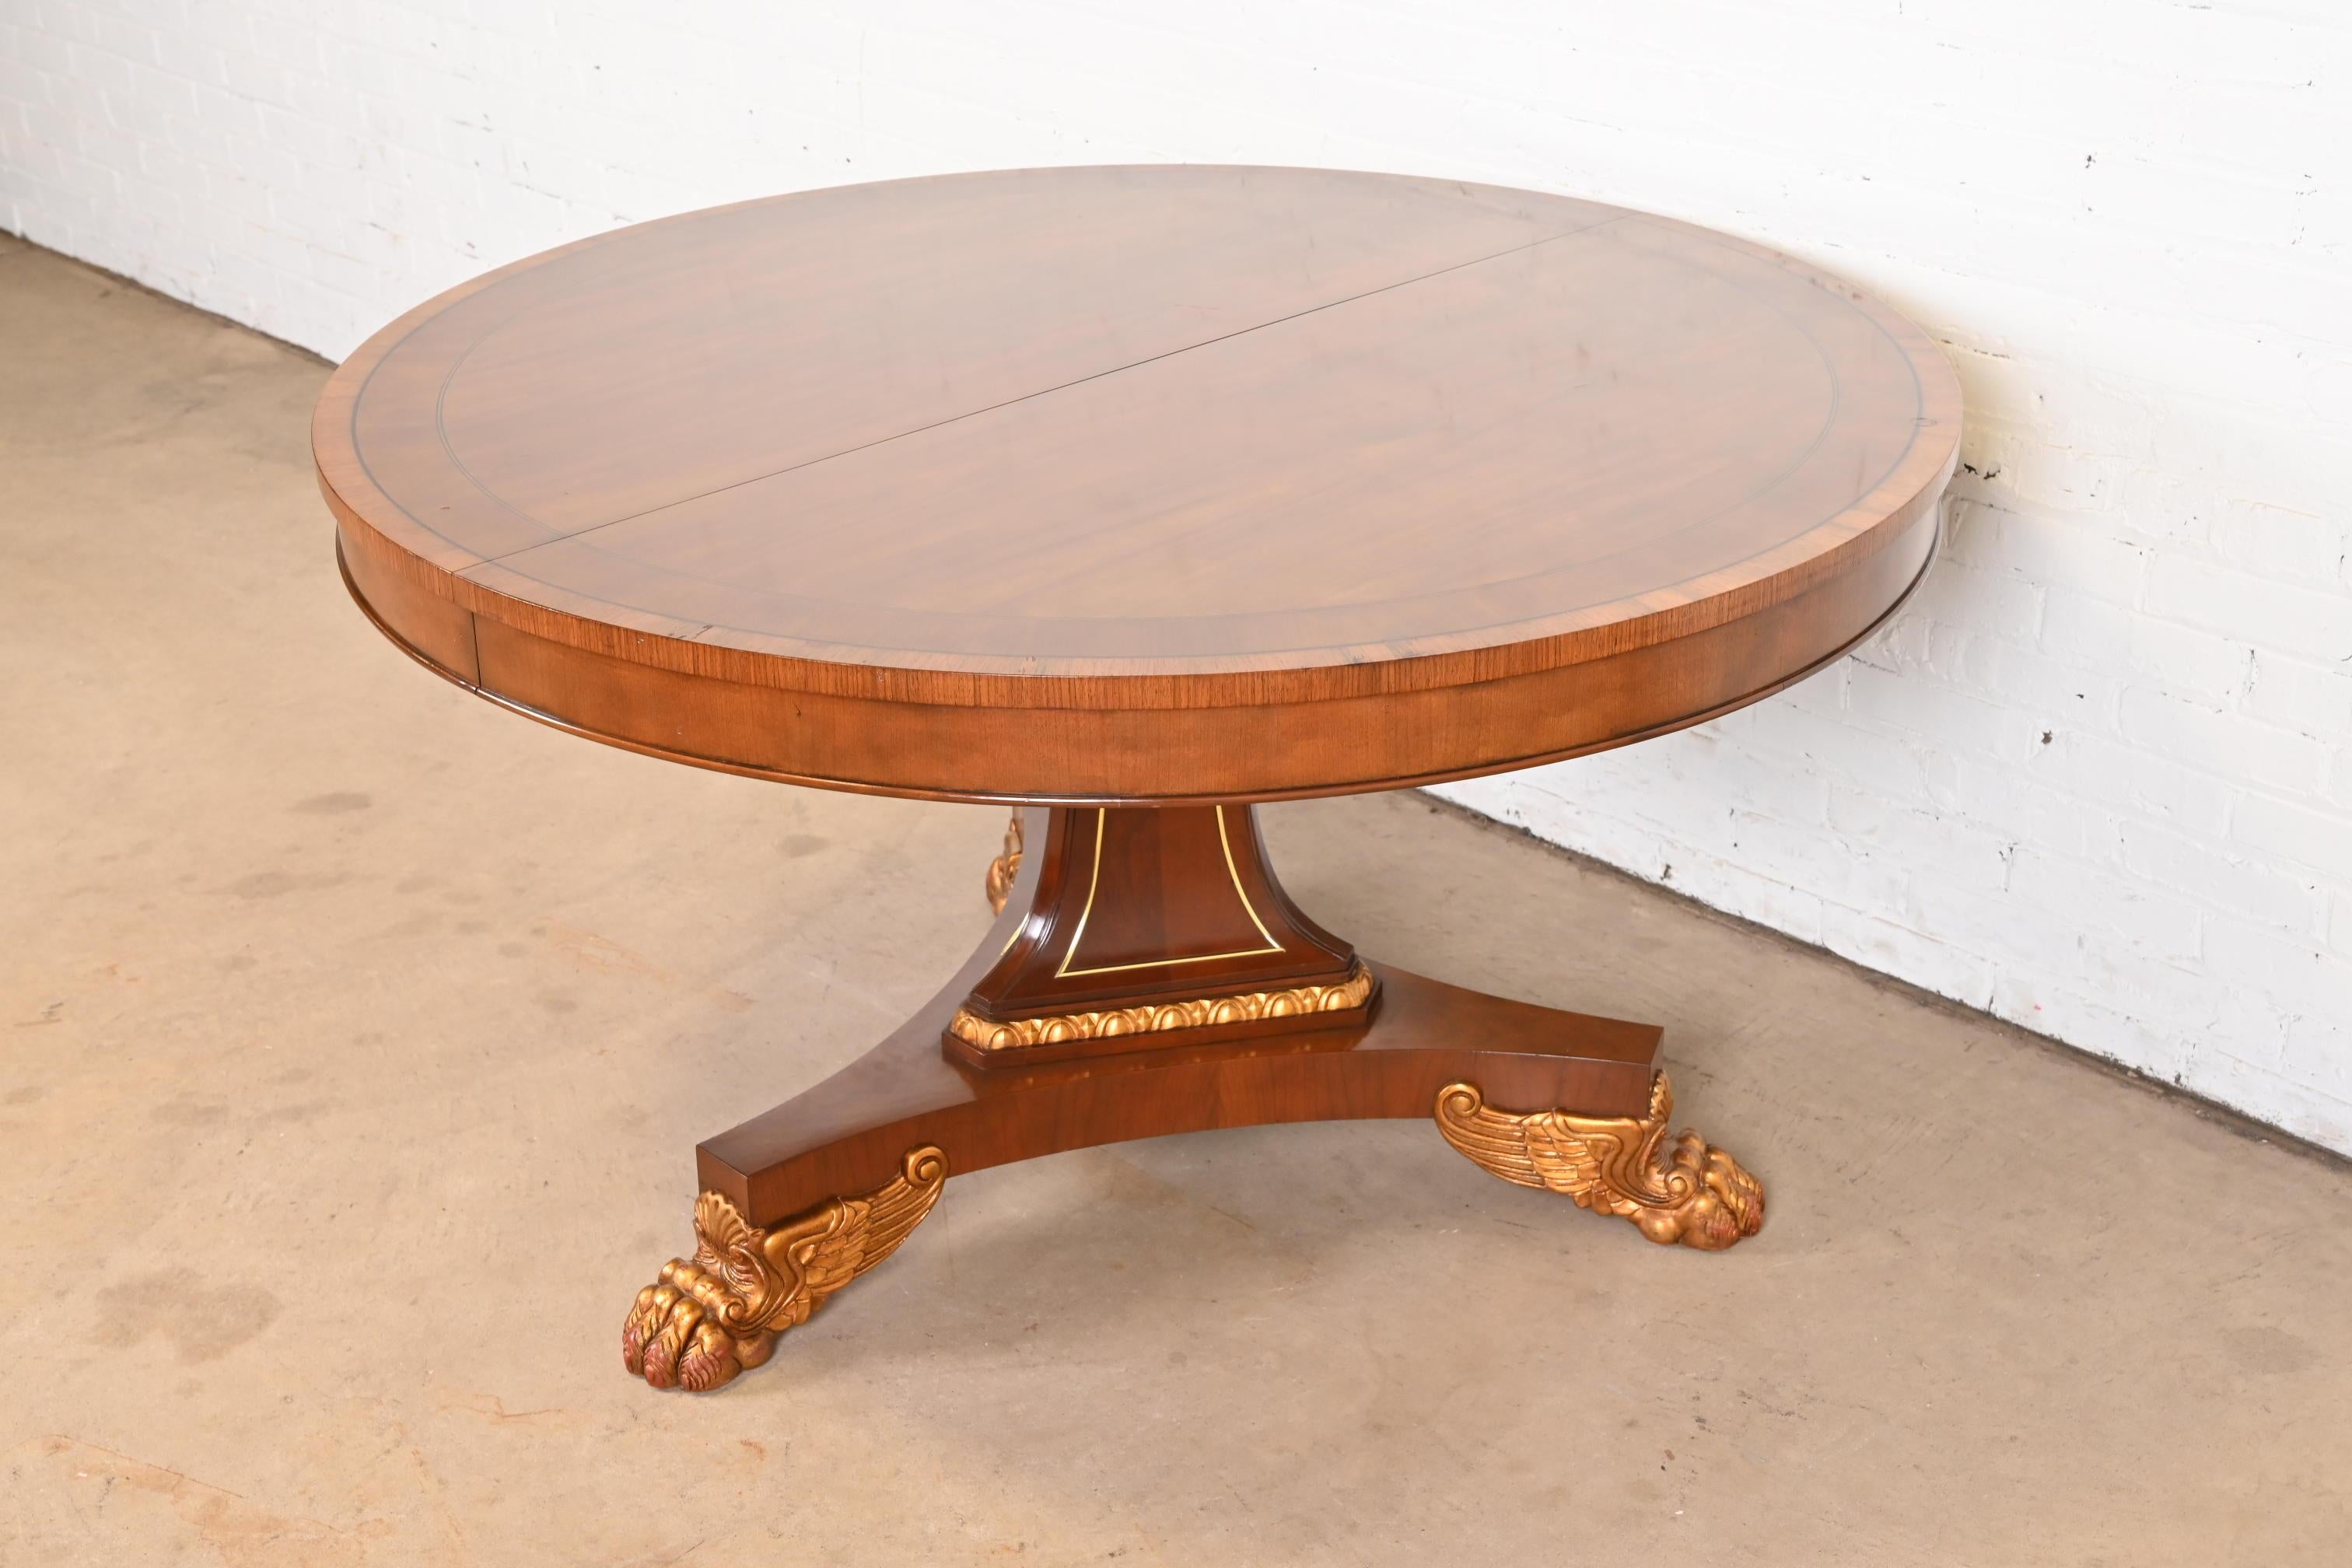 Baker Furniture Regency Paw Foot Pedestal Dining Table or Center Table In Good Condition For Sale In South Bend, IN